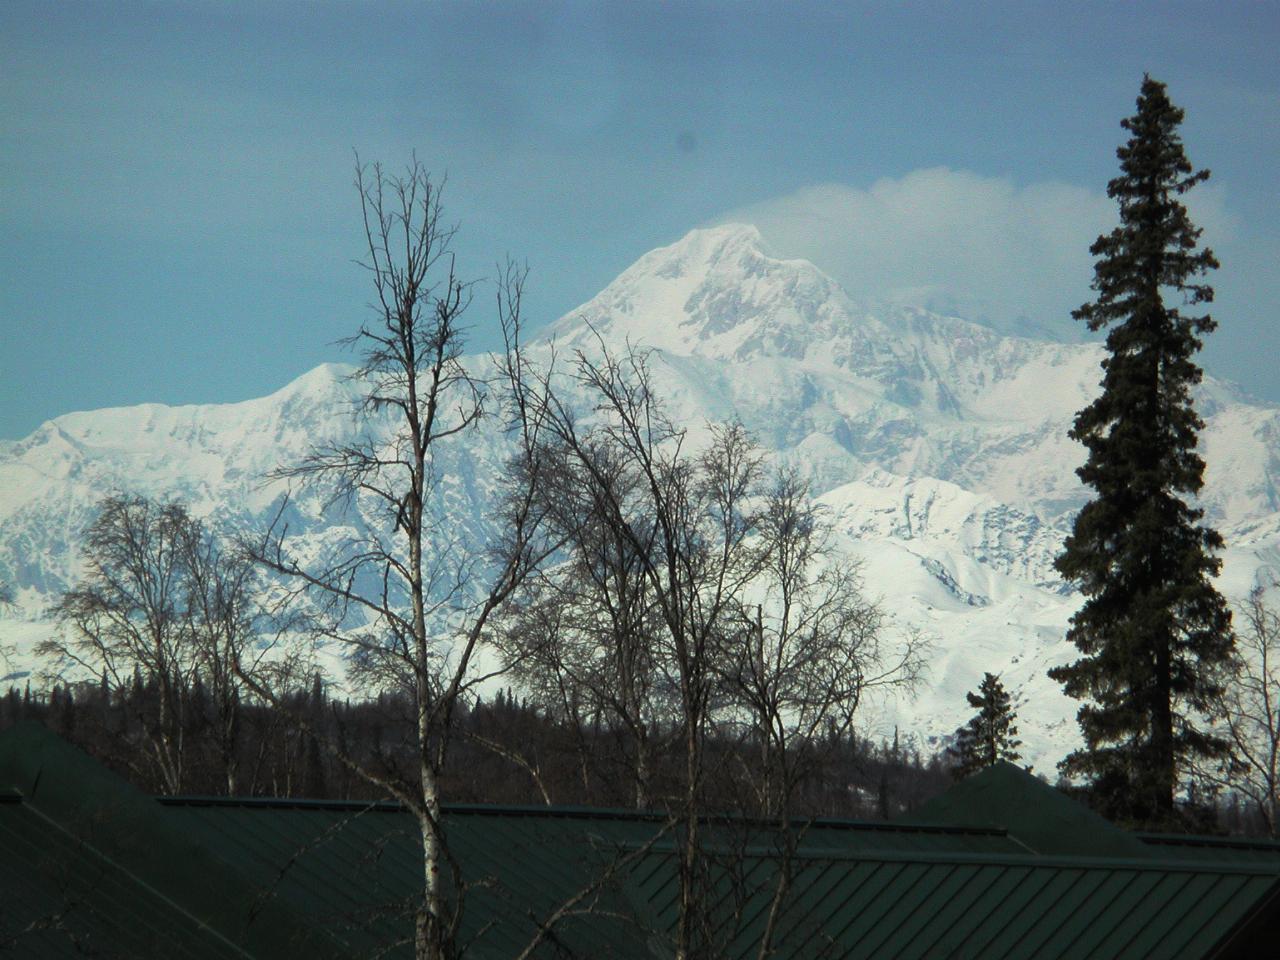 Mt. McKinley as seen from Princess Resort in Denali State Park